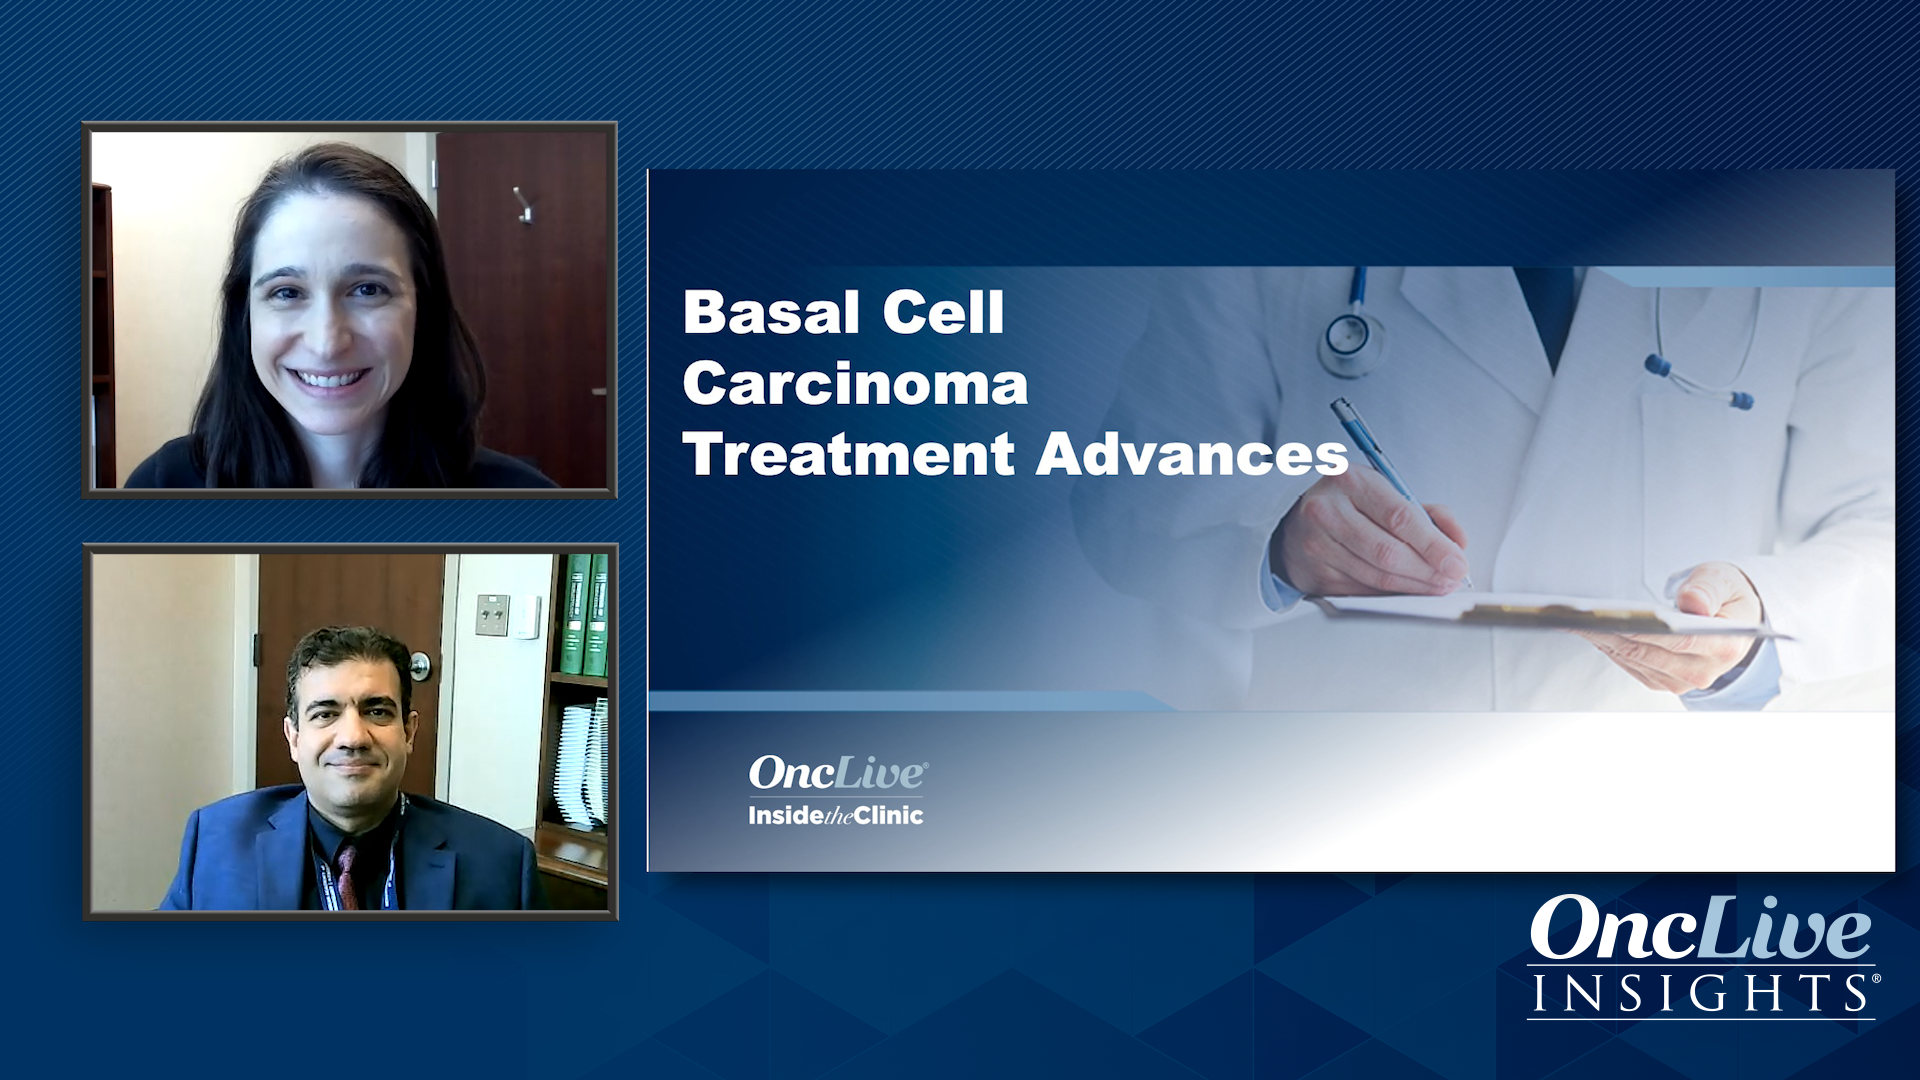 Overview of Basal Cell Carcinoma